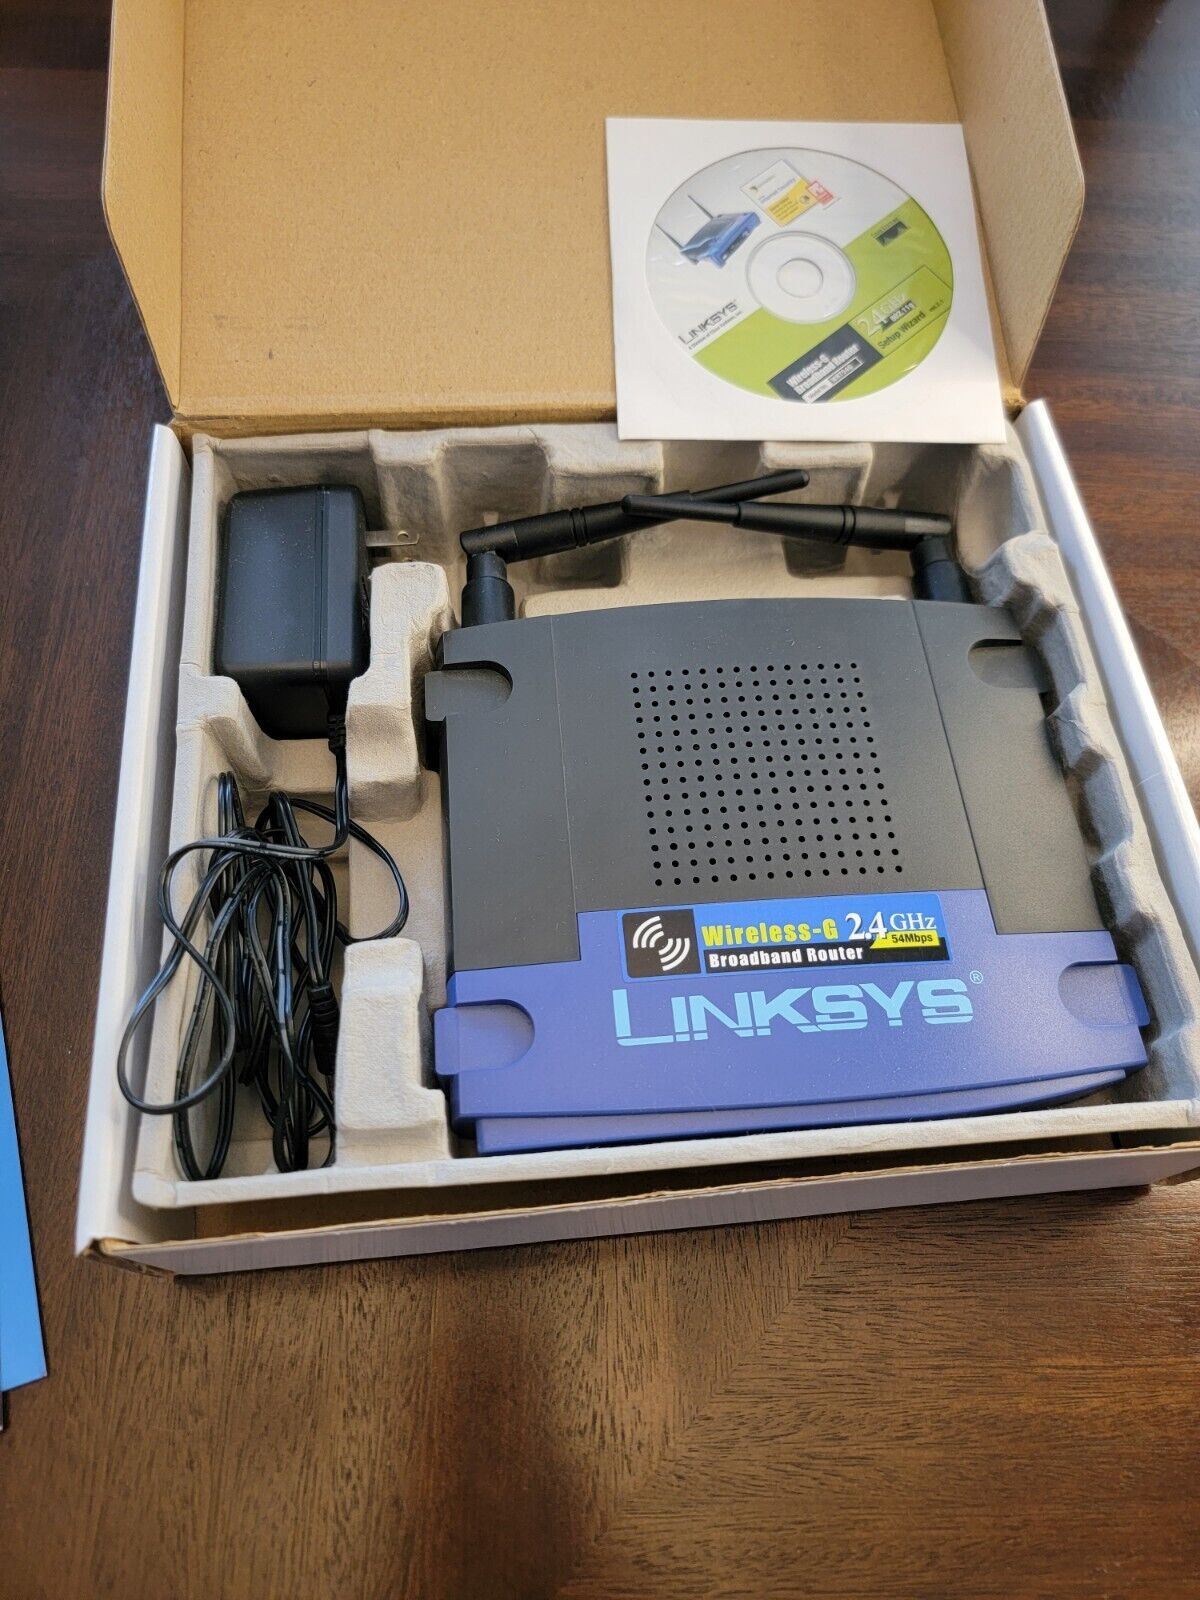 Linksys Wireless-G Broadband Router All-In-One 2.4 GHz WRT54G Slightly Used